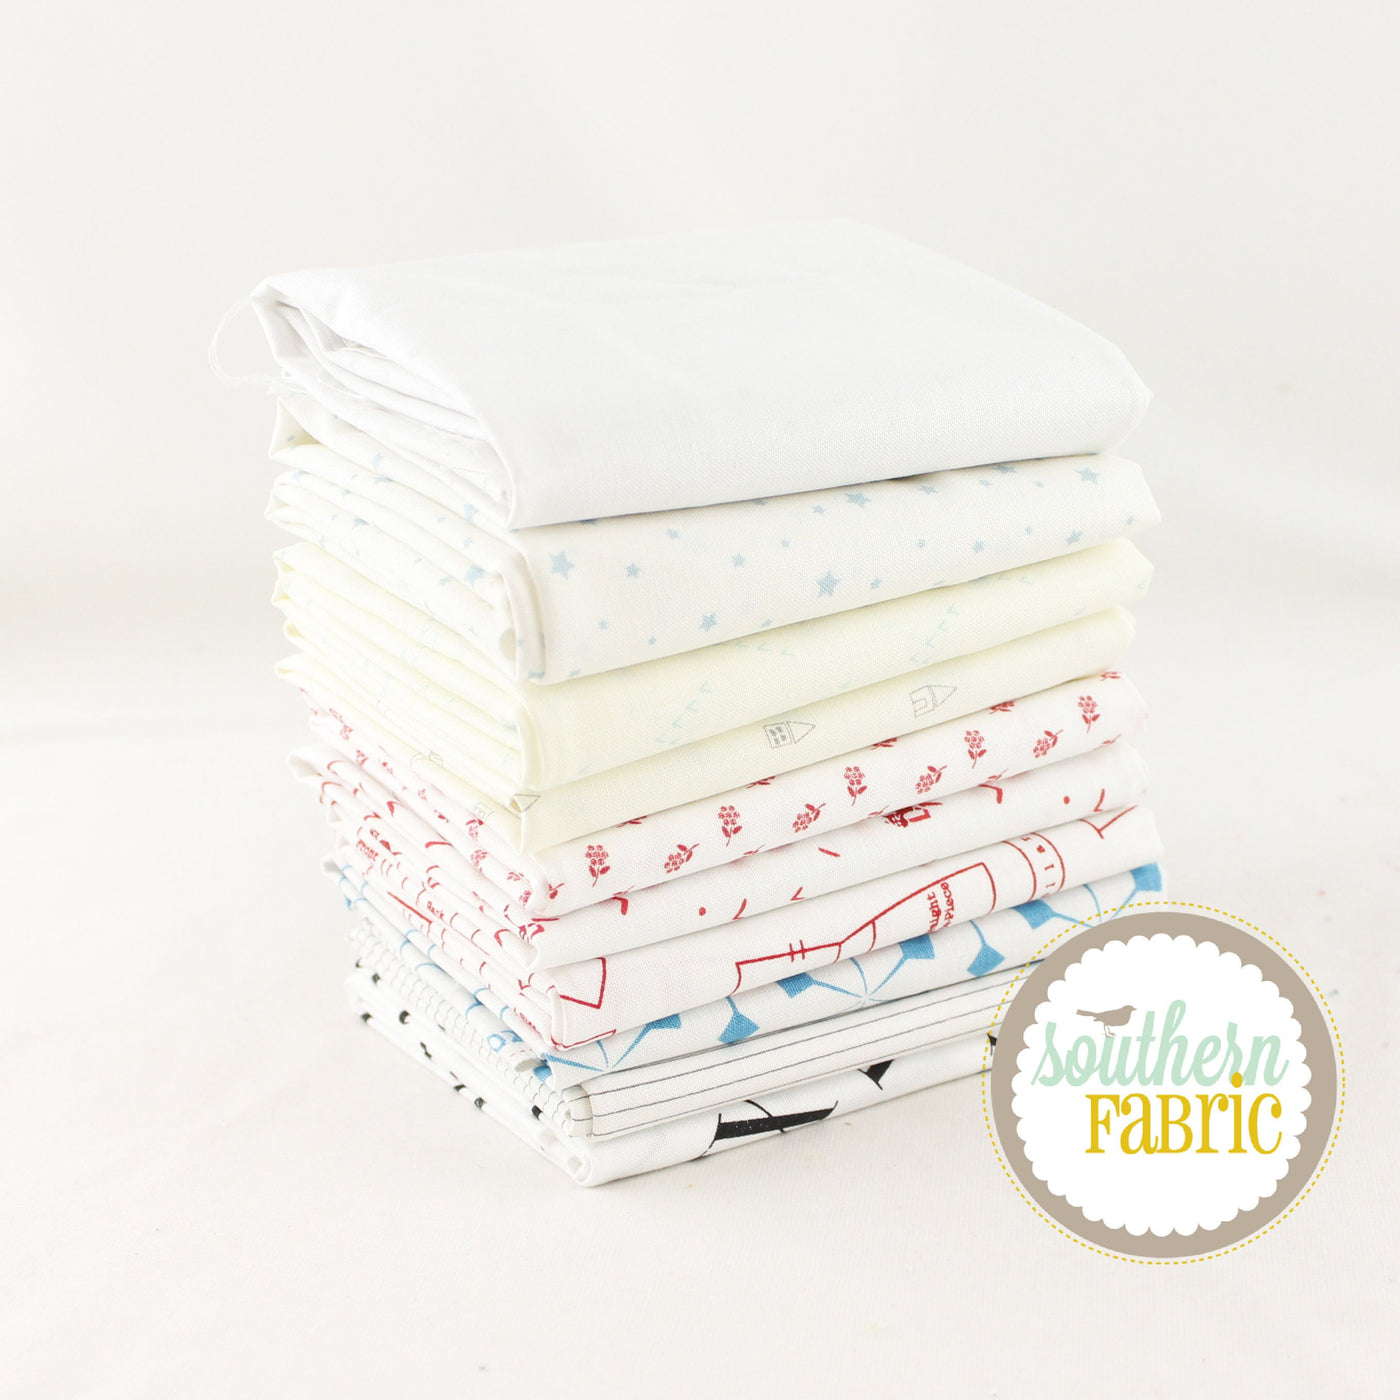 White Low Volume Fat Quarter Bundle (10 pcs) by Mixed Designers for Southern Fabric